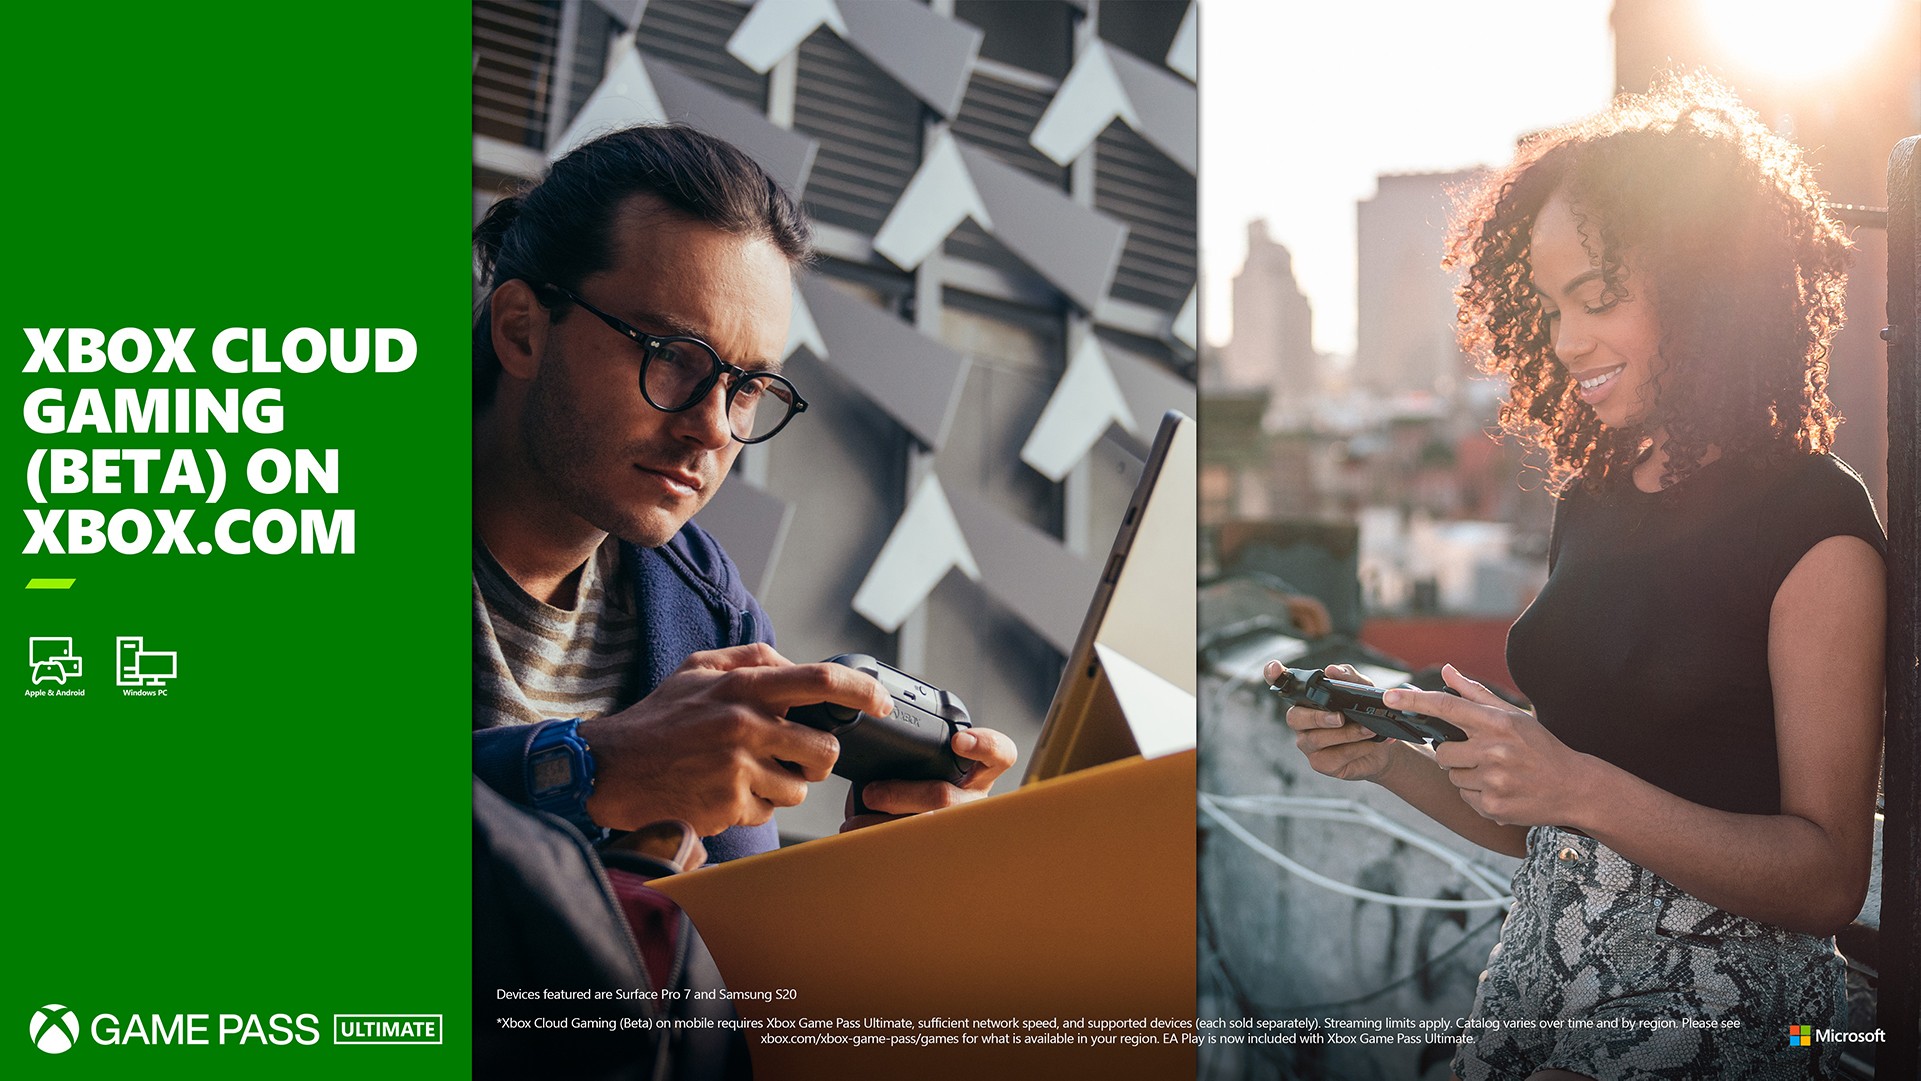 At Xbox, our mission is simple: bring the joy and community of gaming to everyone on the planet. To achieve that, we aspire to empower everyone to pla